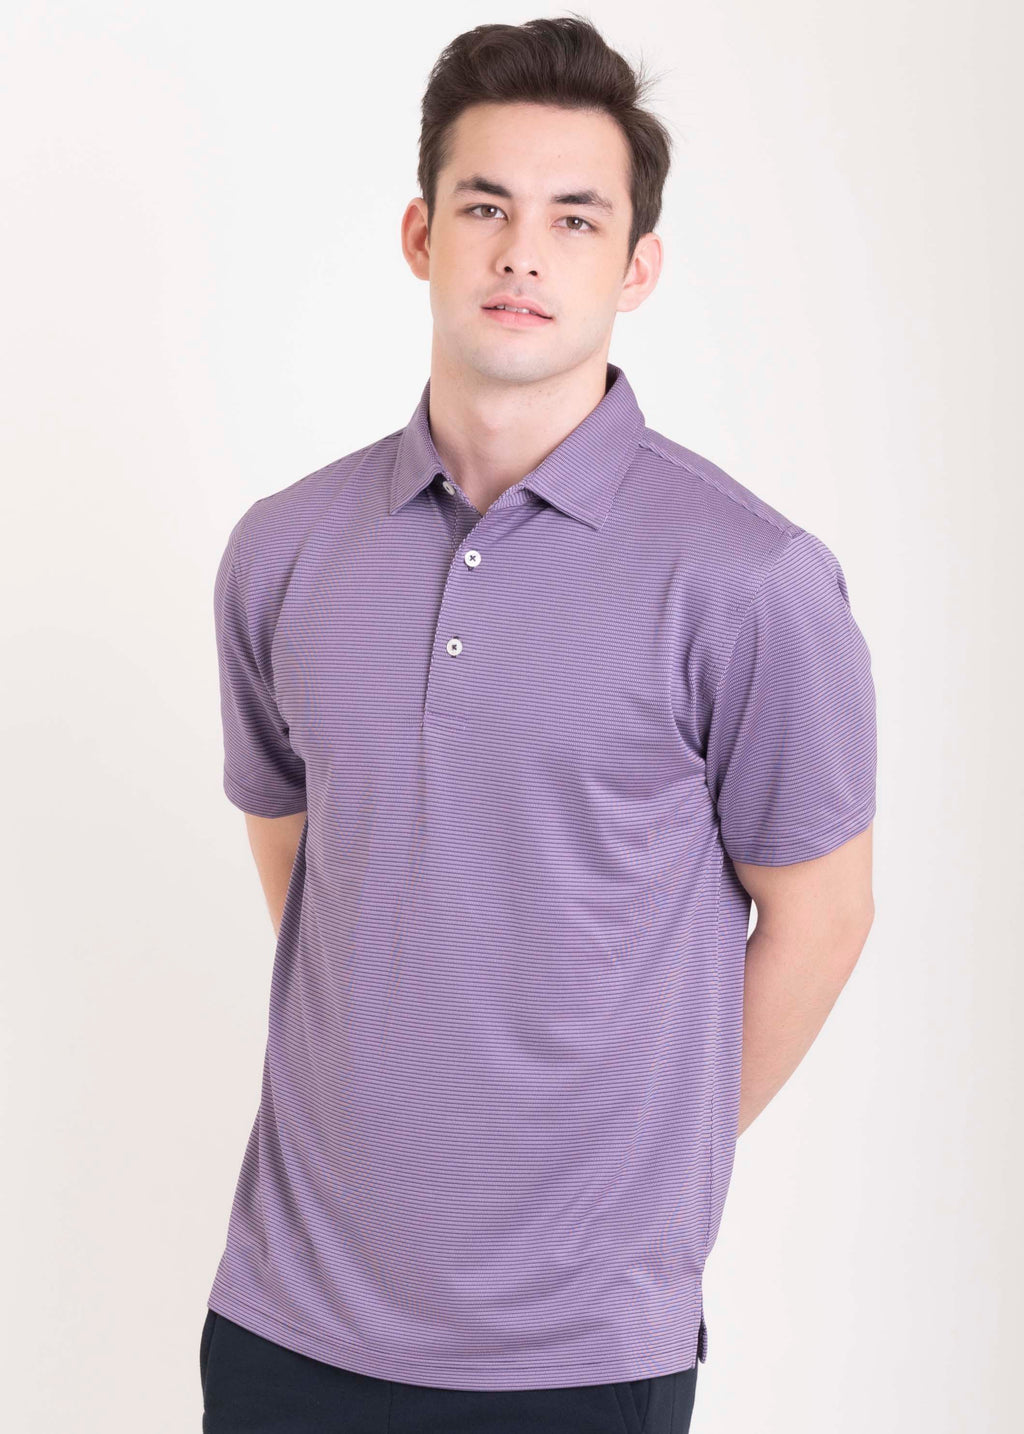 Ramé Dryfit Polo Shirt in Textured Purple